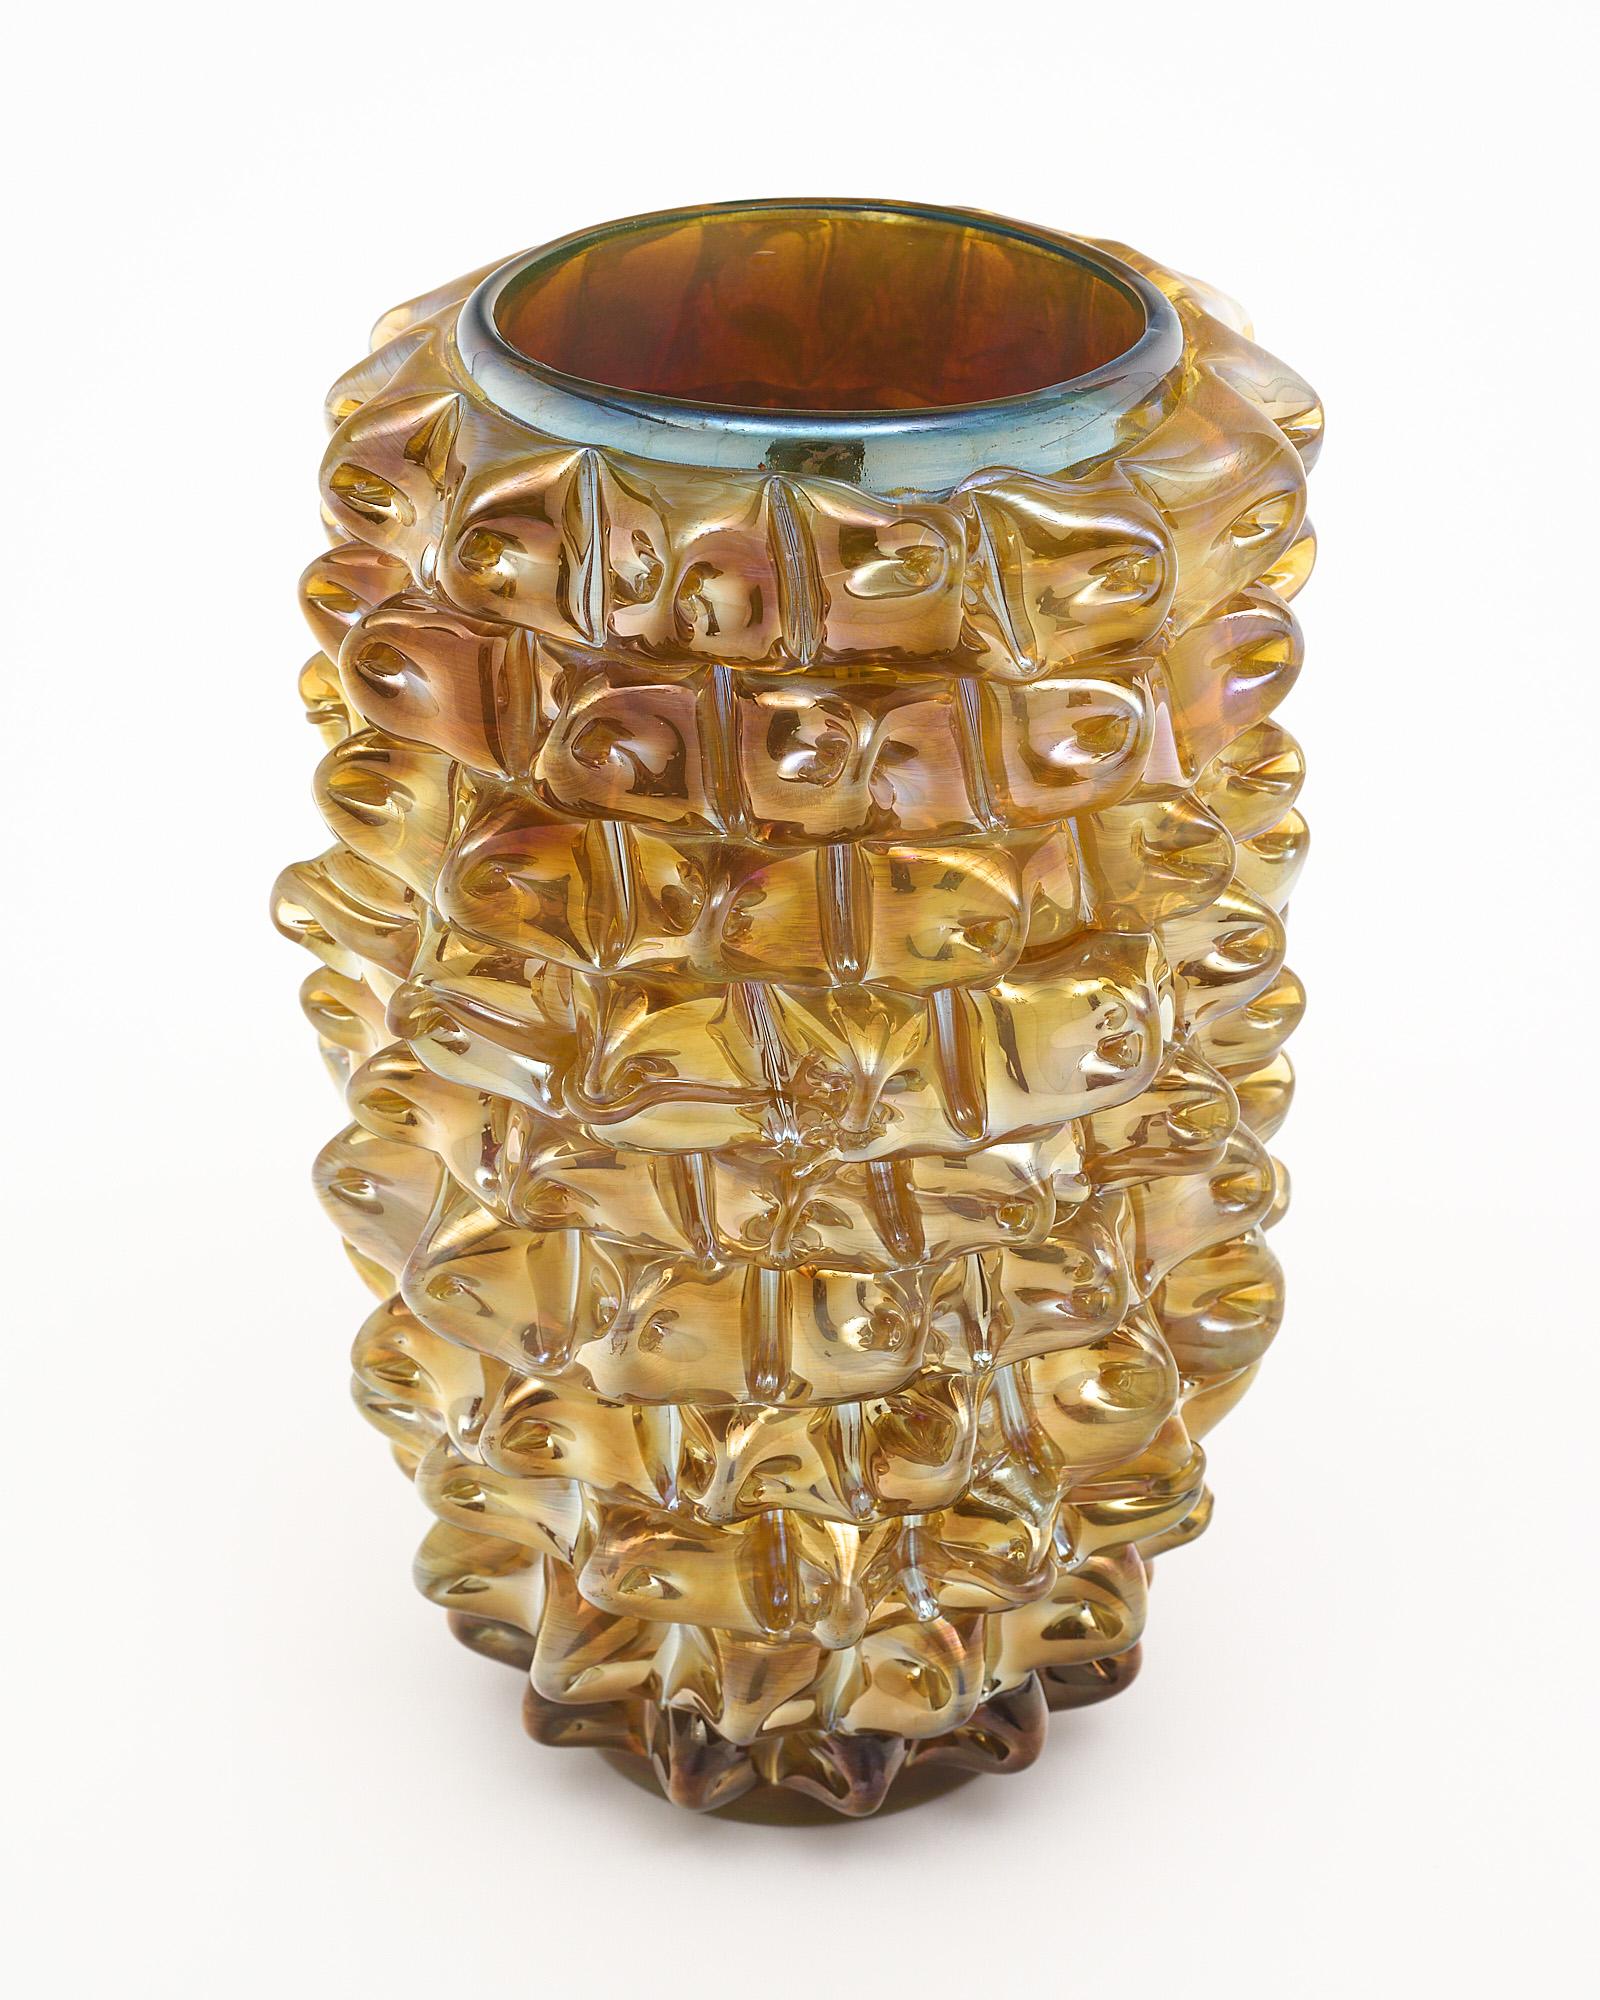 Murano glass vase; Italian; from the island of Murano and crafted in the manner of Barovier. This hand-blown piece has a is made using the incamiciato technique where several layers of varying colors are used to create a unique color and depth. It